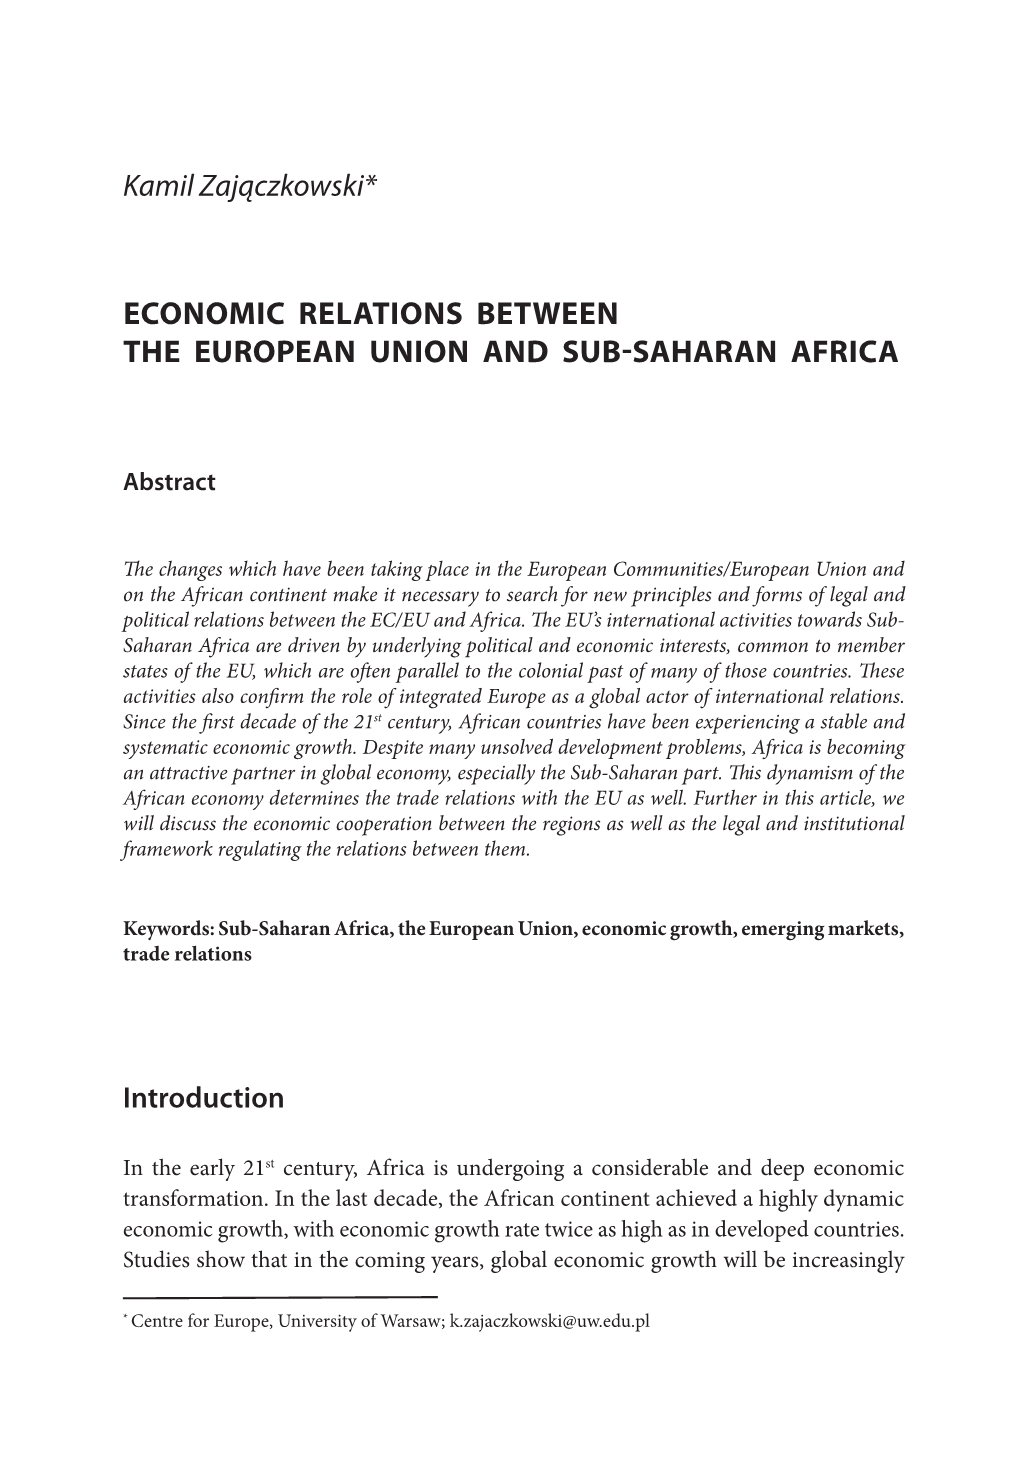 Economic Relations Between the European Union and Sub-Saharan Africa